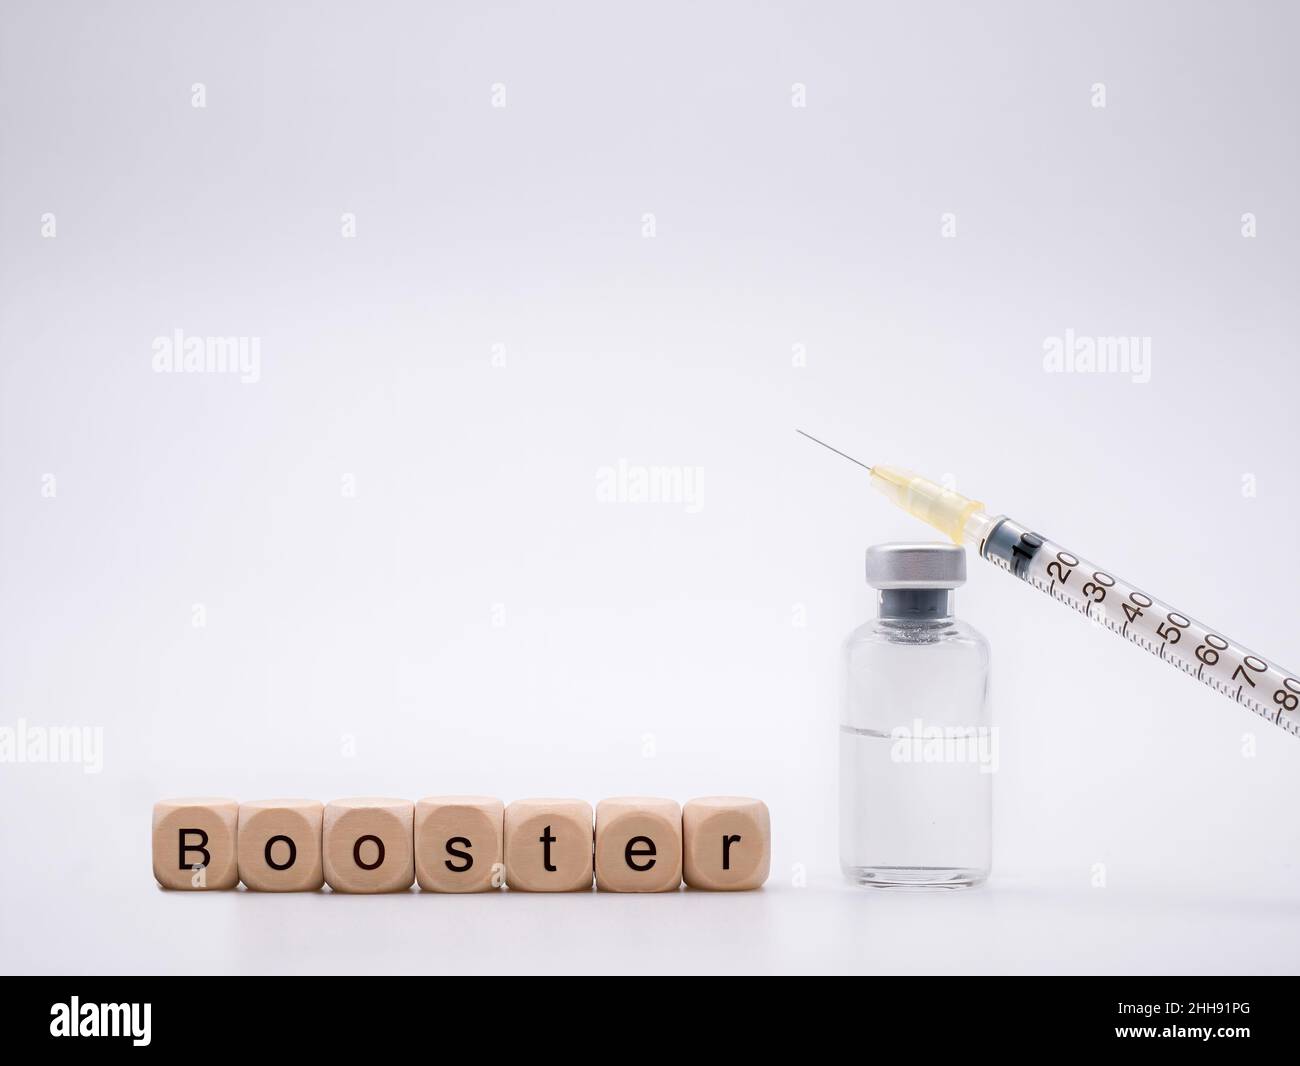 Letters 'Booster' with vaccine bottle and syringe in front of white background Stock Photo